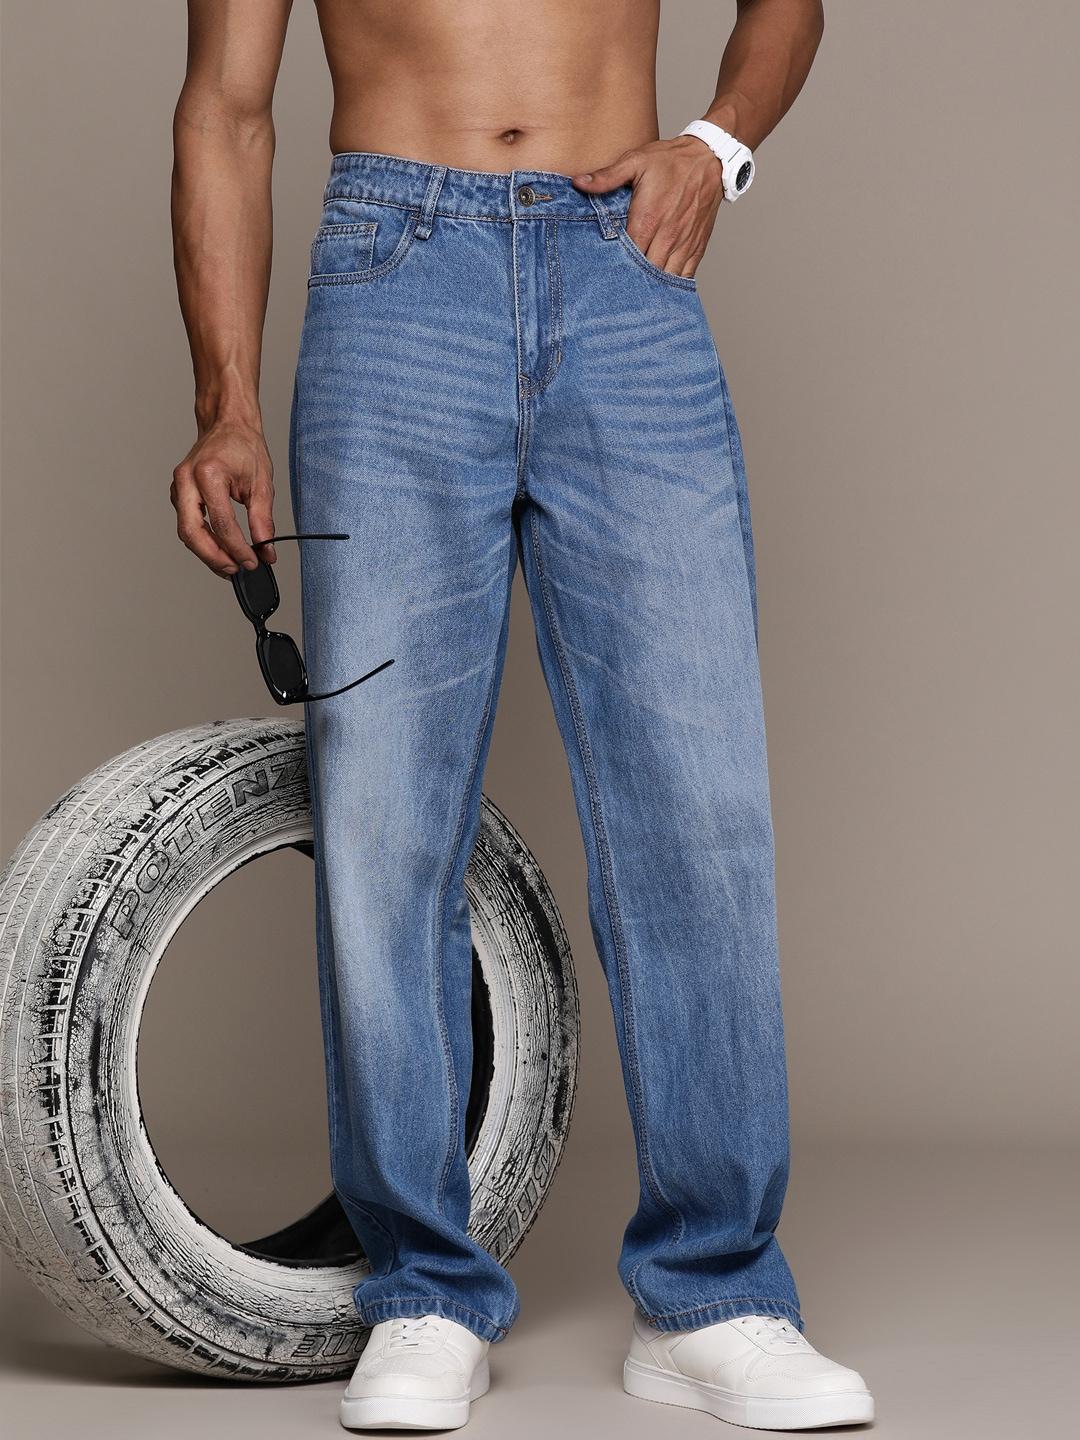 The Roadster Lifestyle Co. Men Pure Cotton Straight Fit Jeans